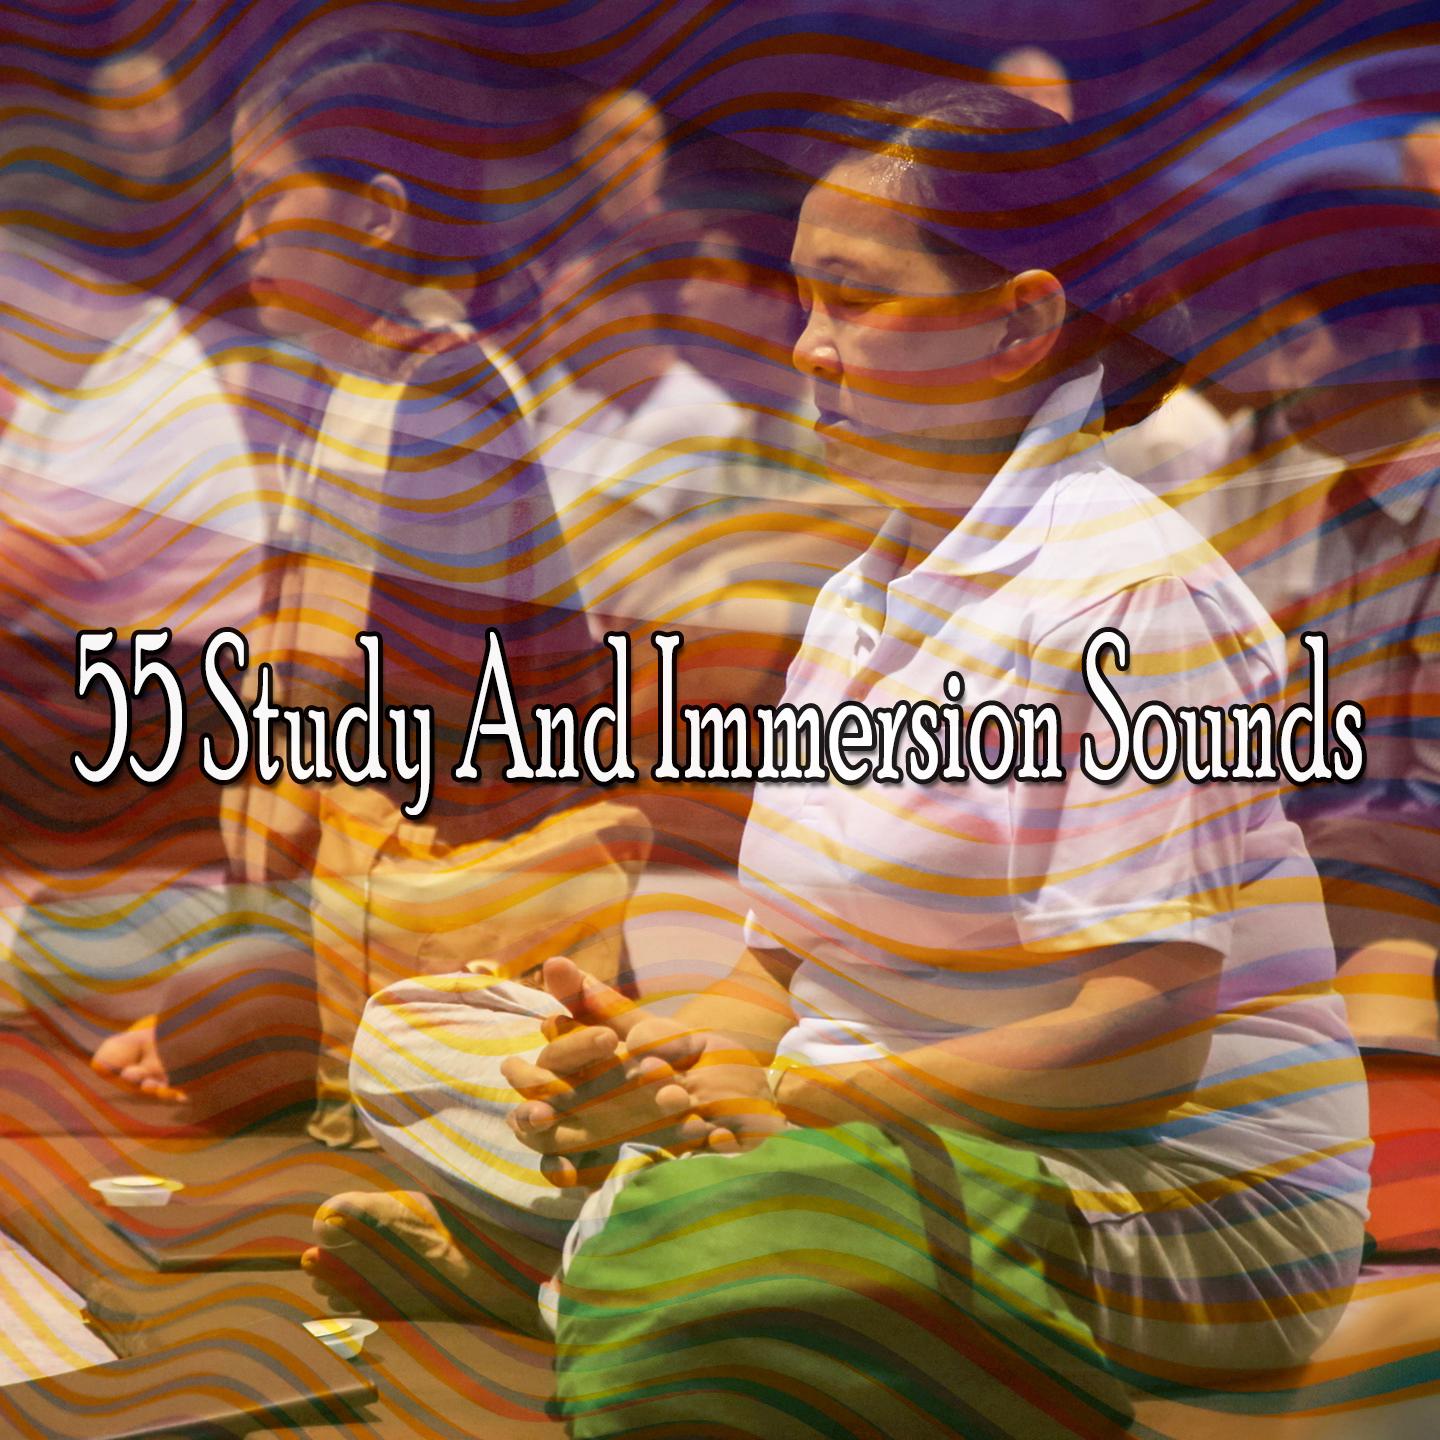 55 Study and Immersion Sounds